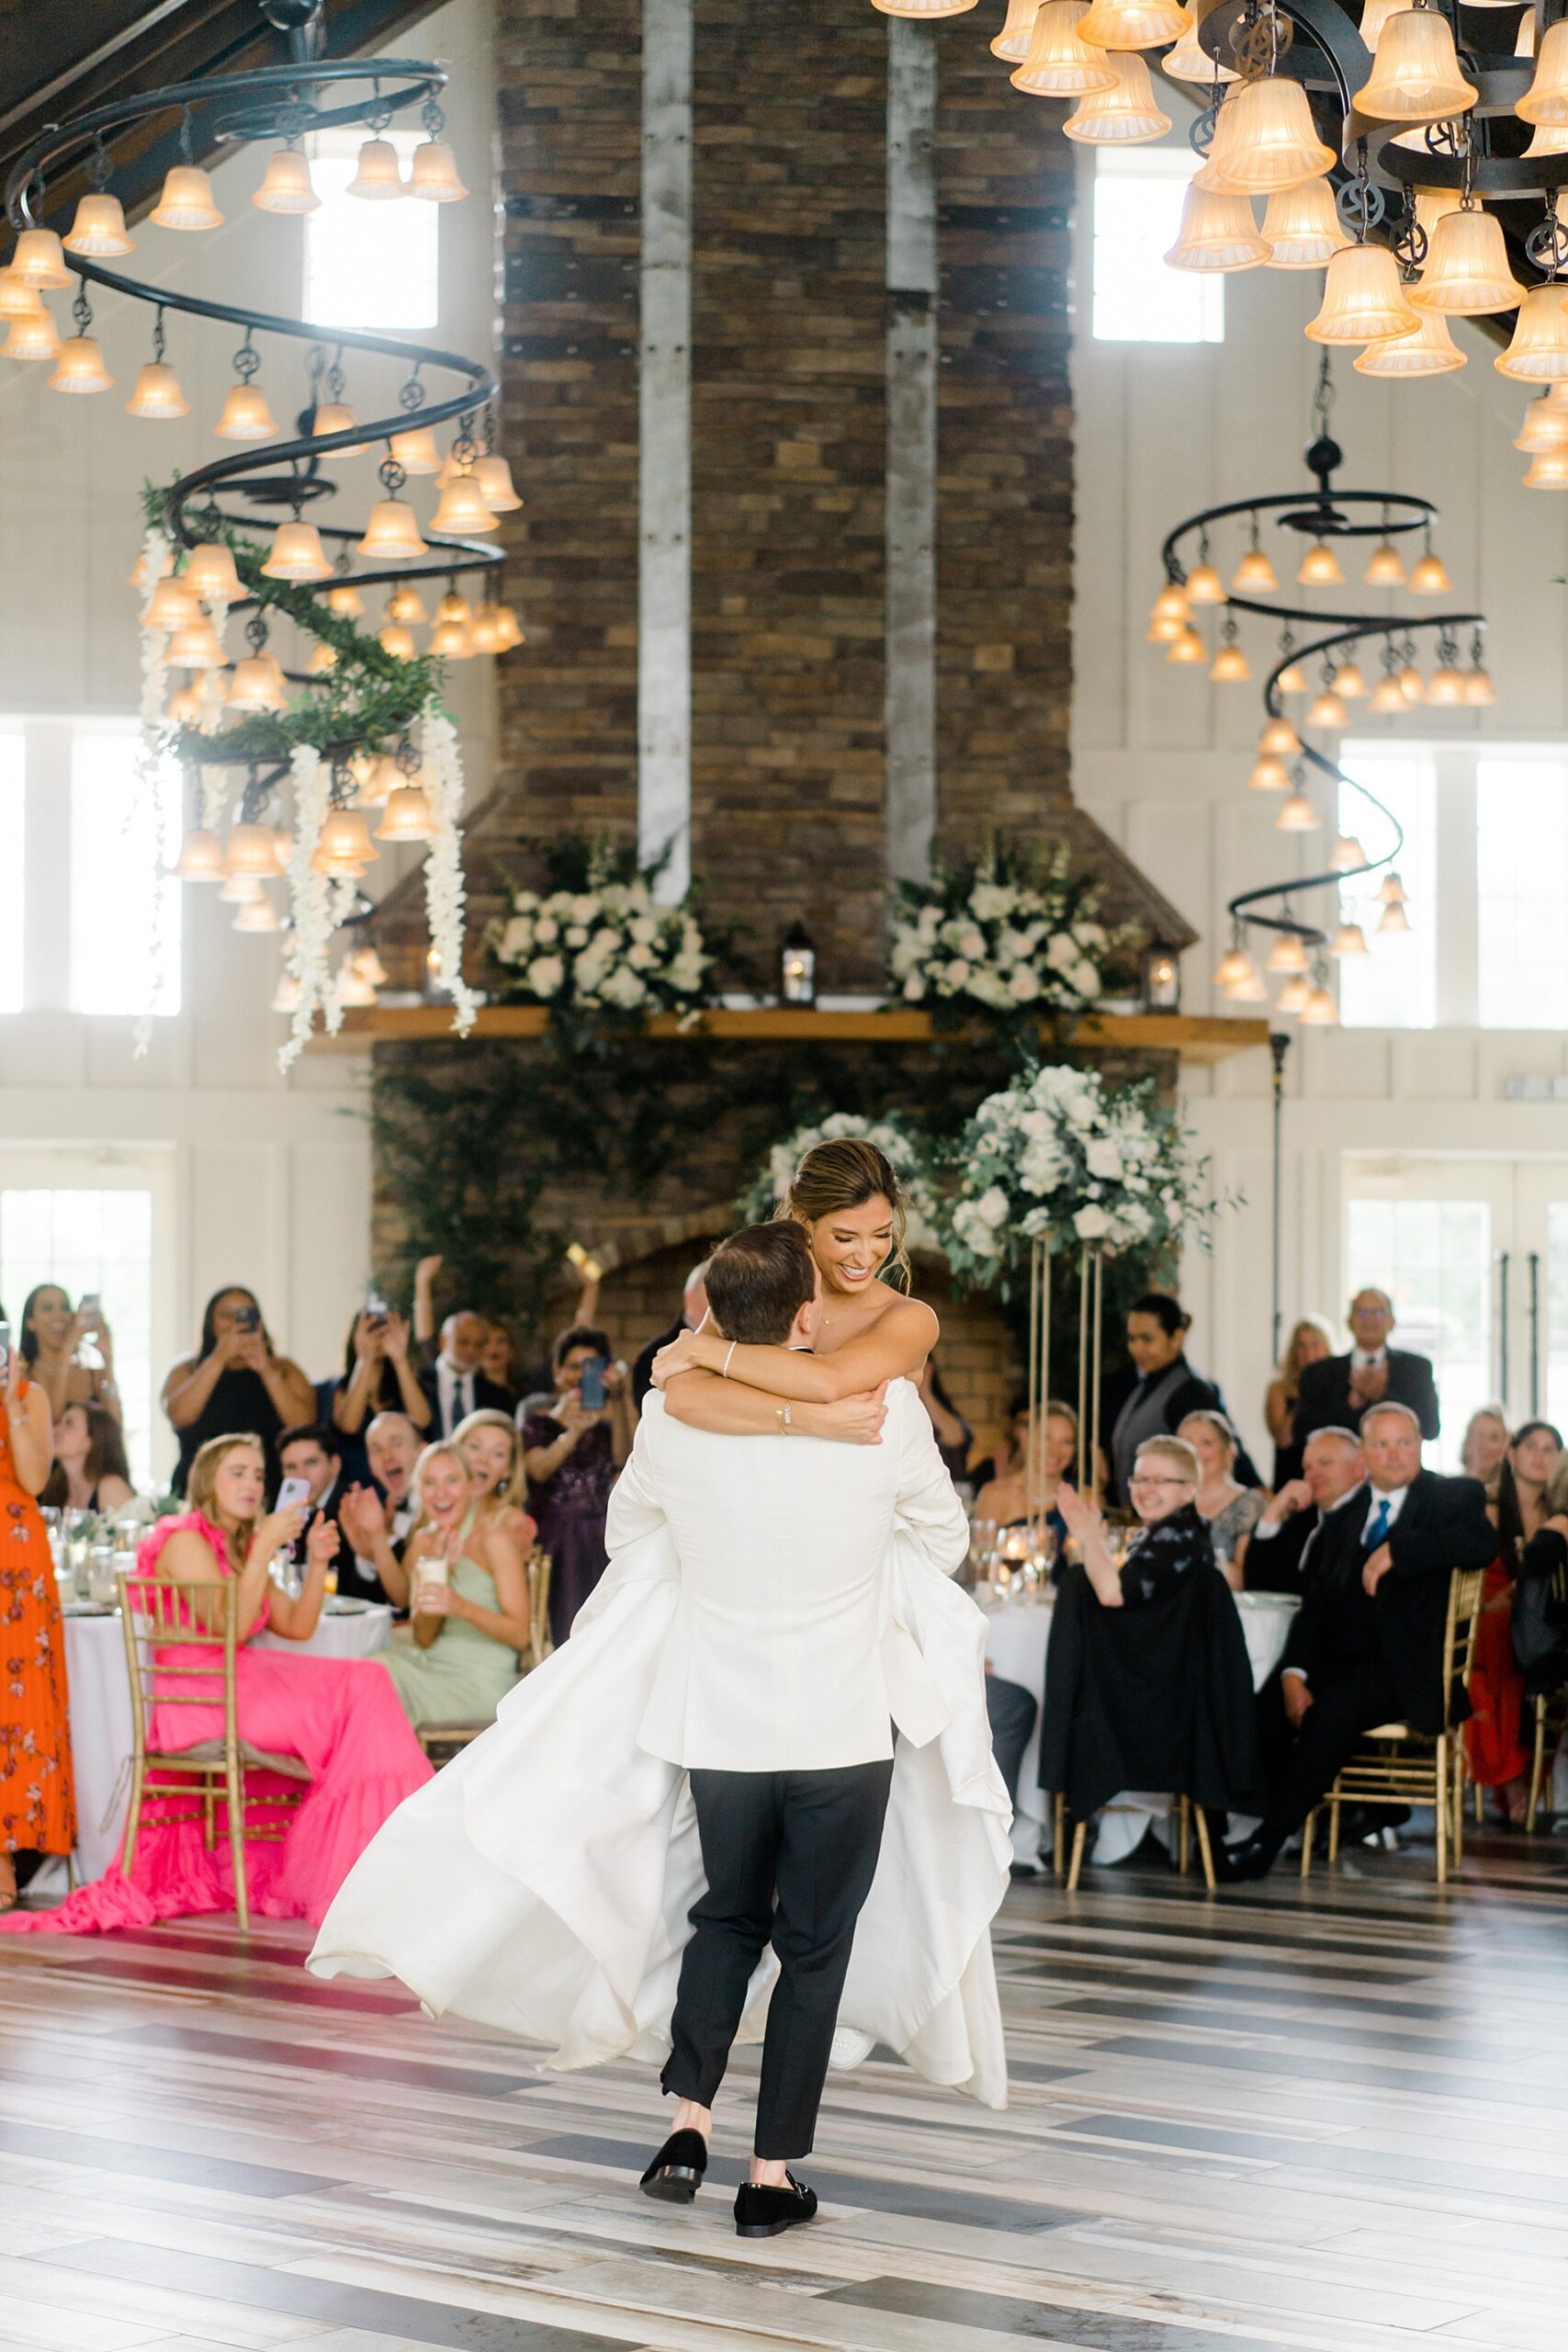 groom lifts bride up during first dance